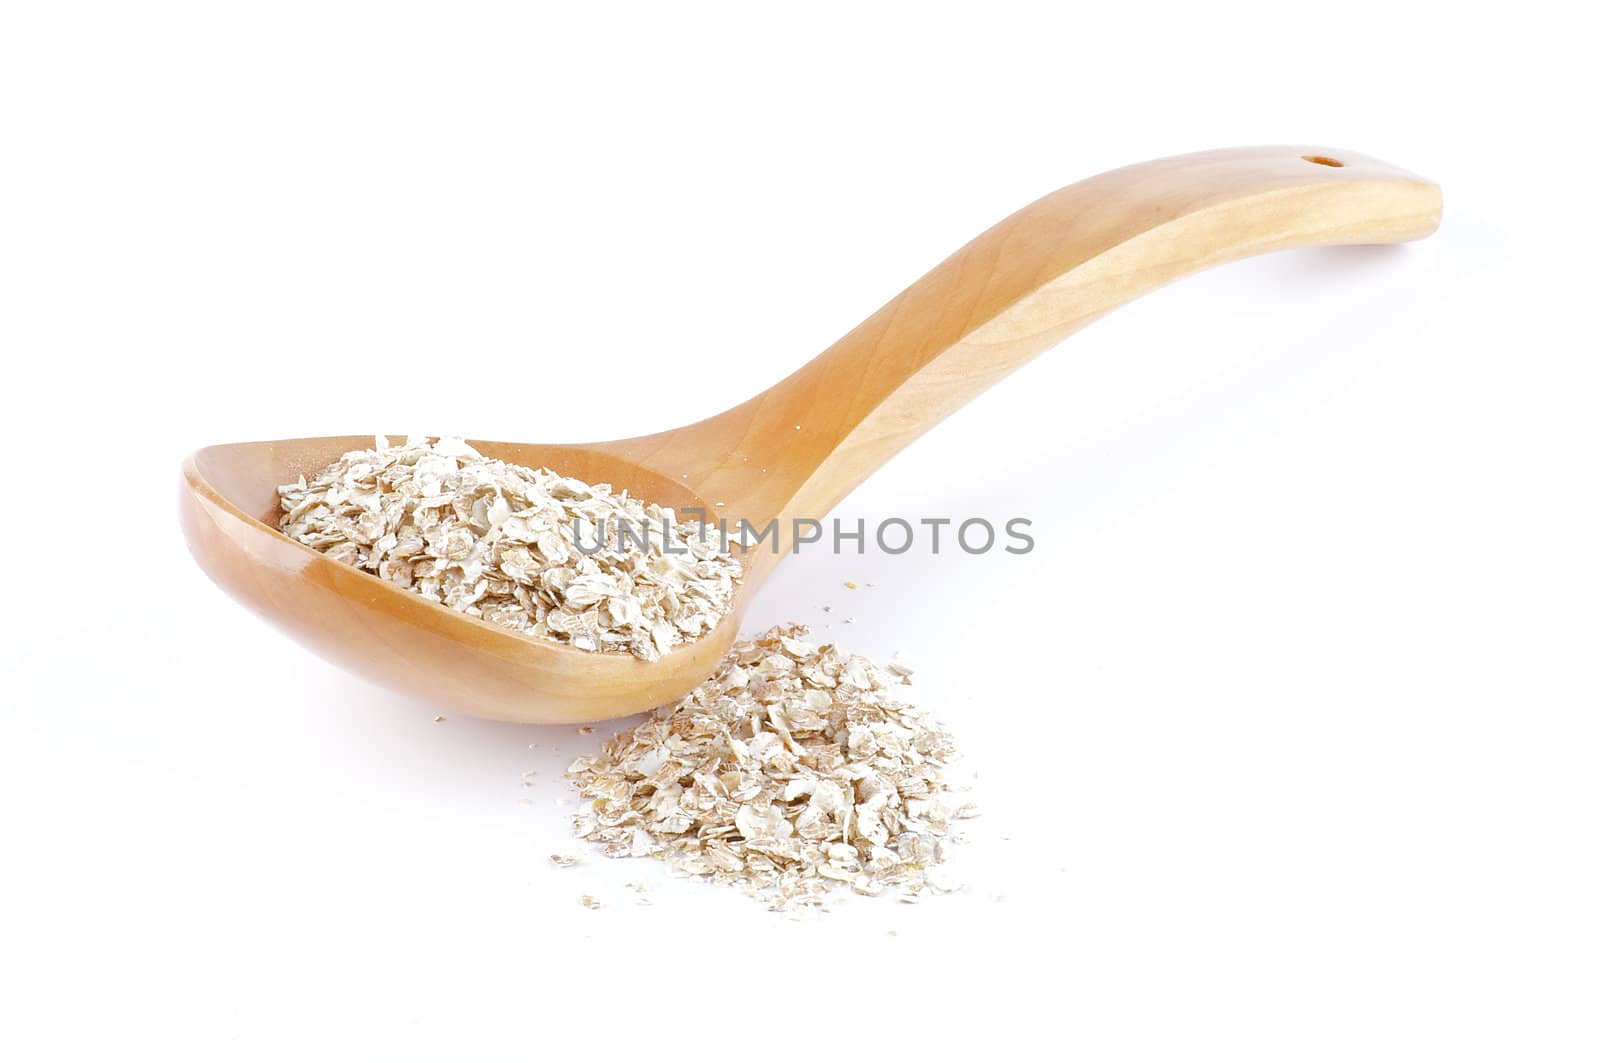 Oat meal cereal mixed in wooden spoon  by zhekos